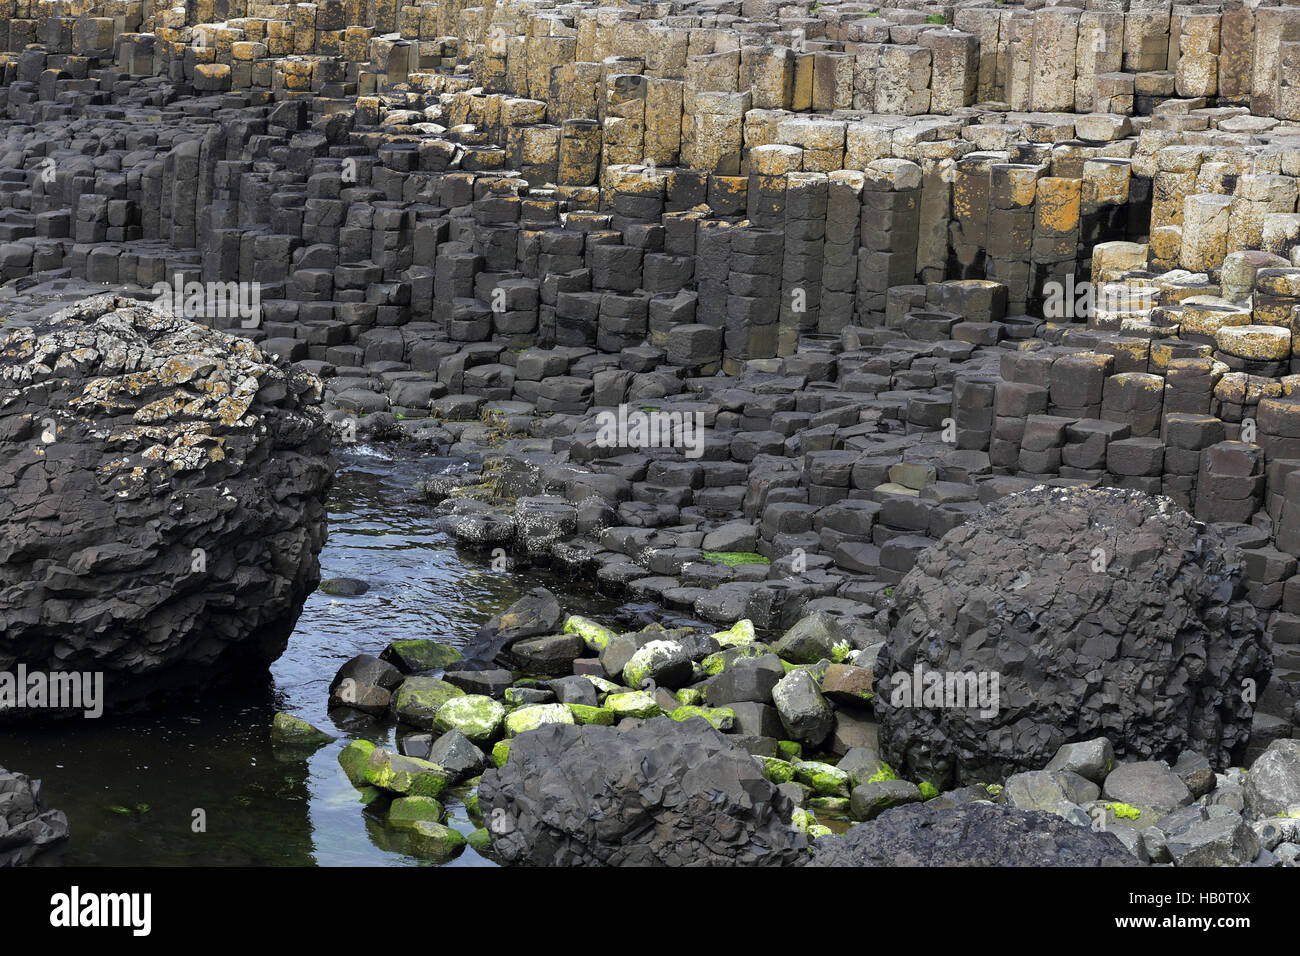 Basalt colums of Giant's Causeway, Ulster GB Stock Photo